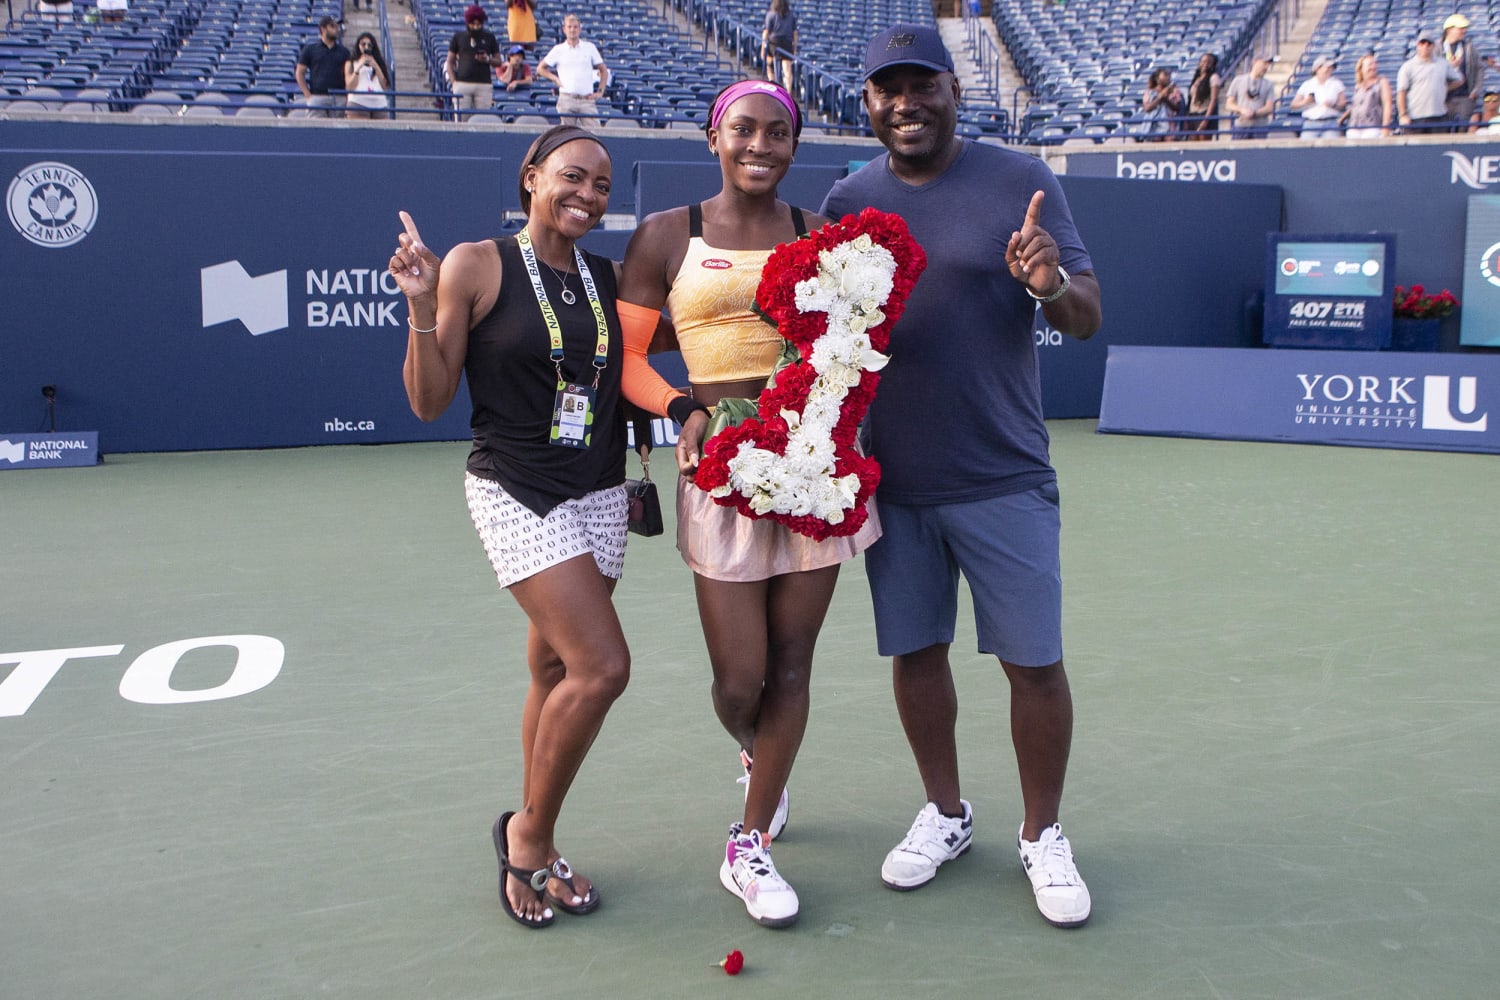 Coco Gauff says her parents are the reason she plays tennis. Everything we know about the Gauffs